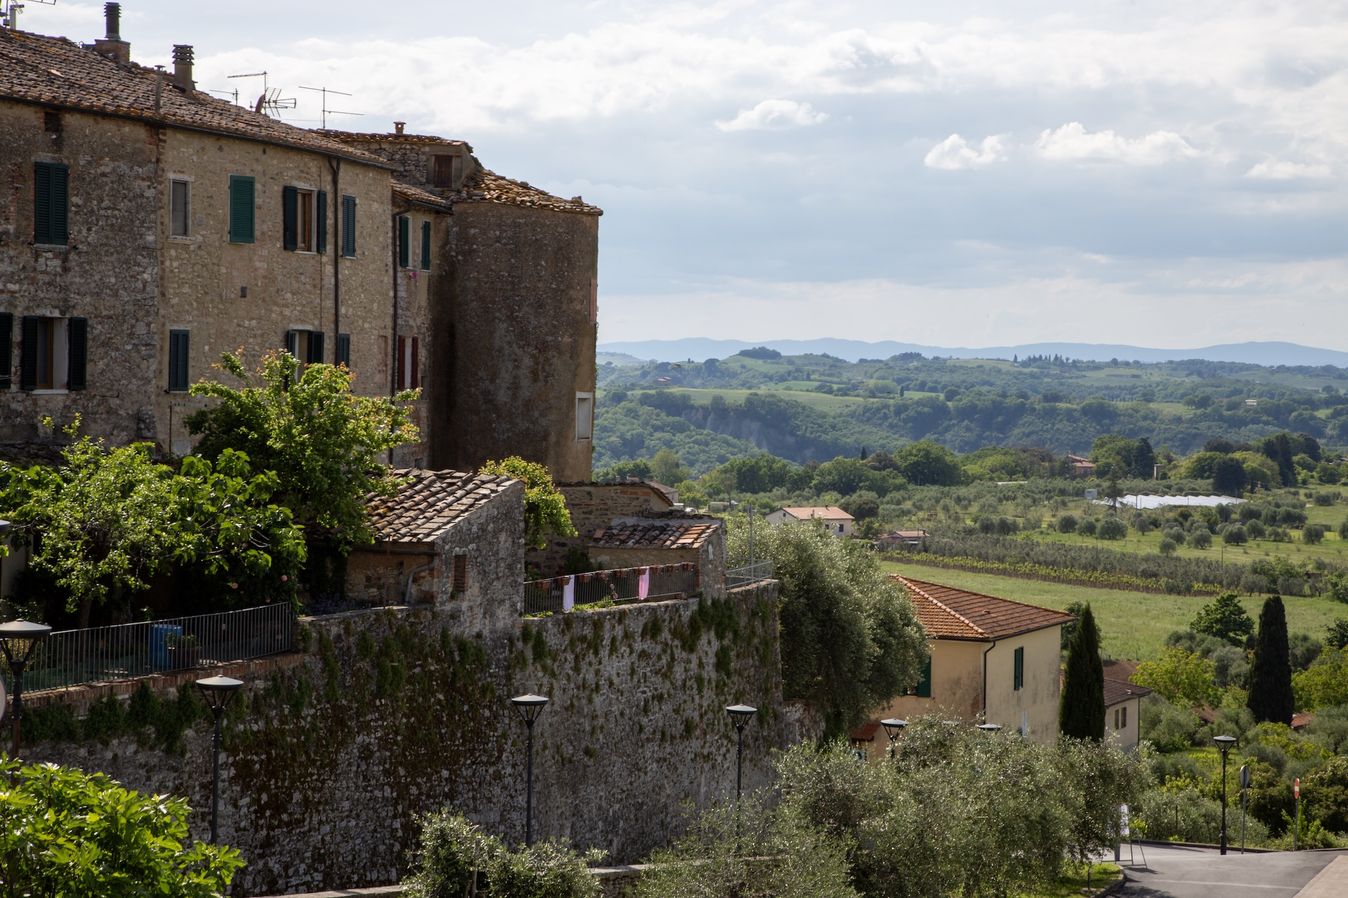 Rapolano Terme has a hilltop view of the countryside